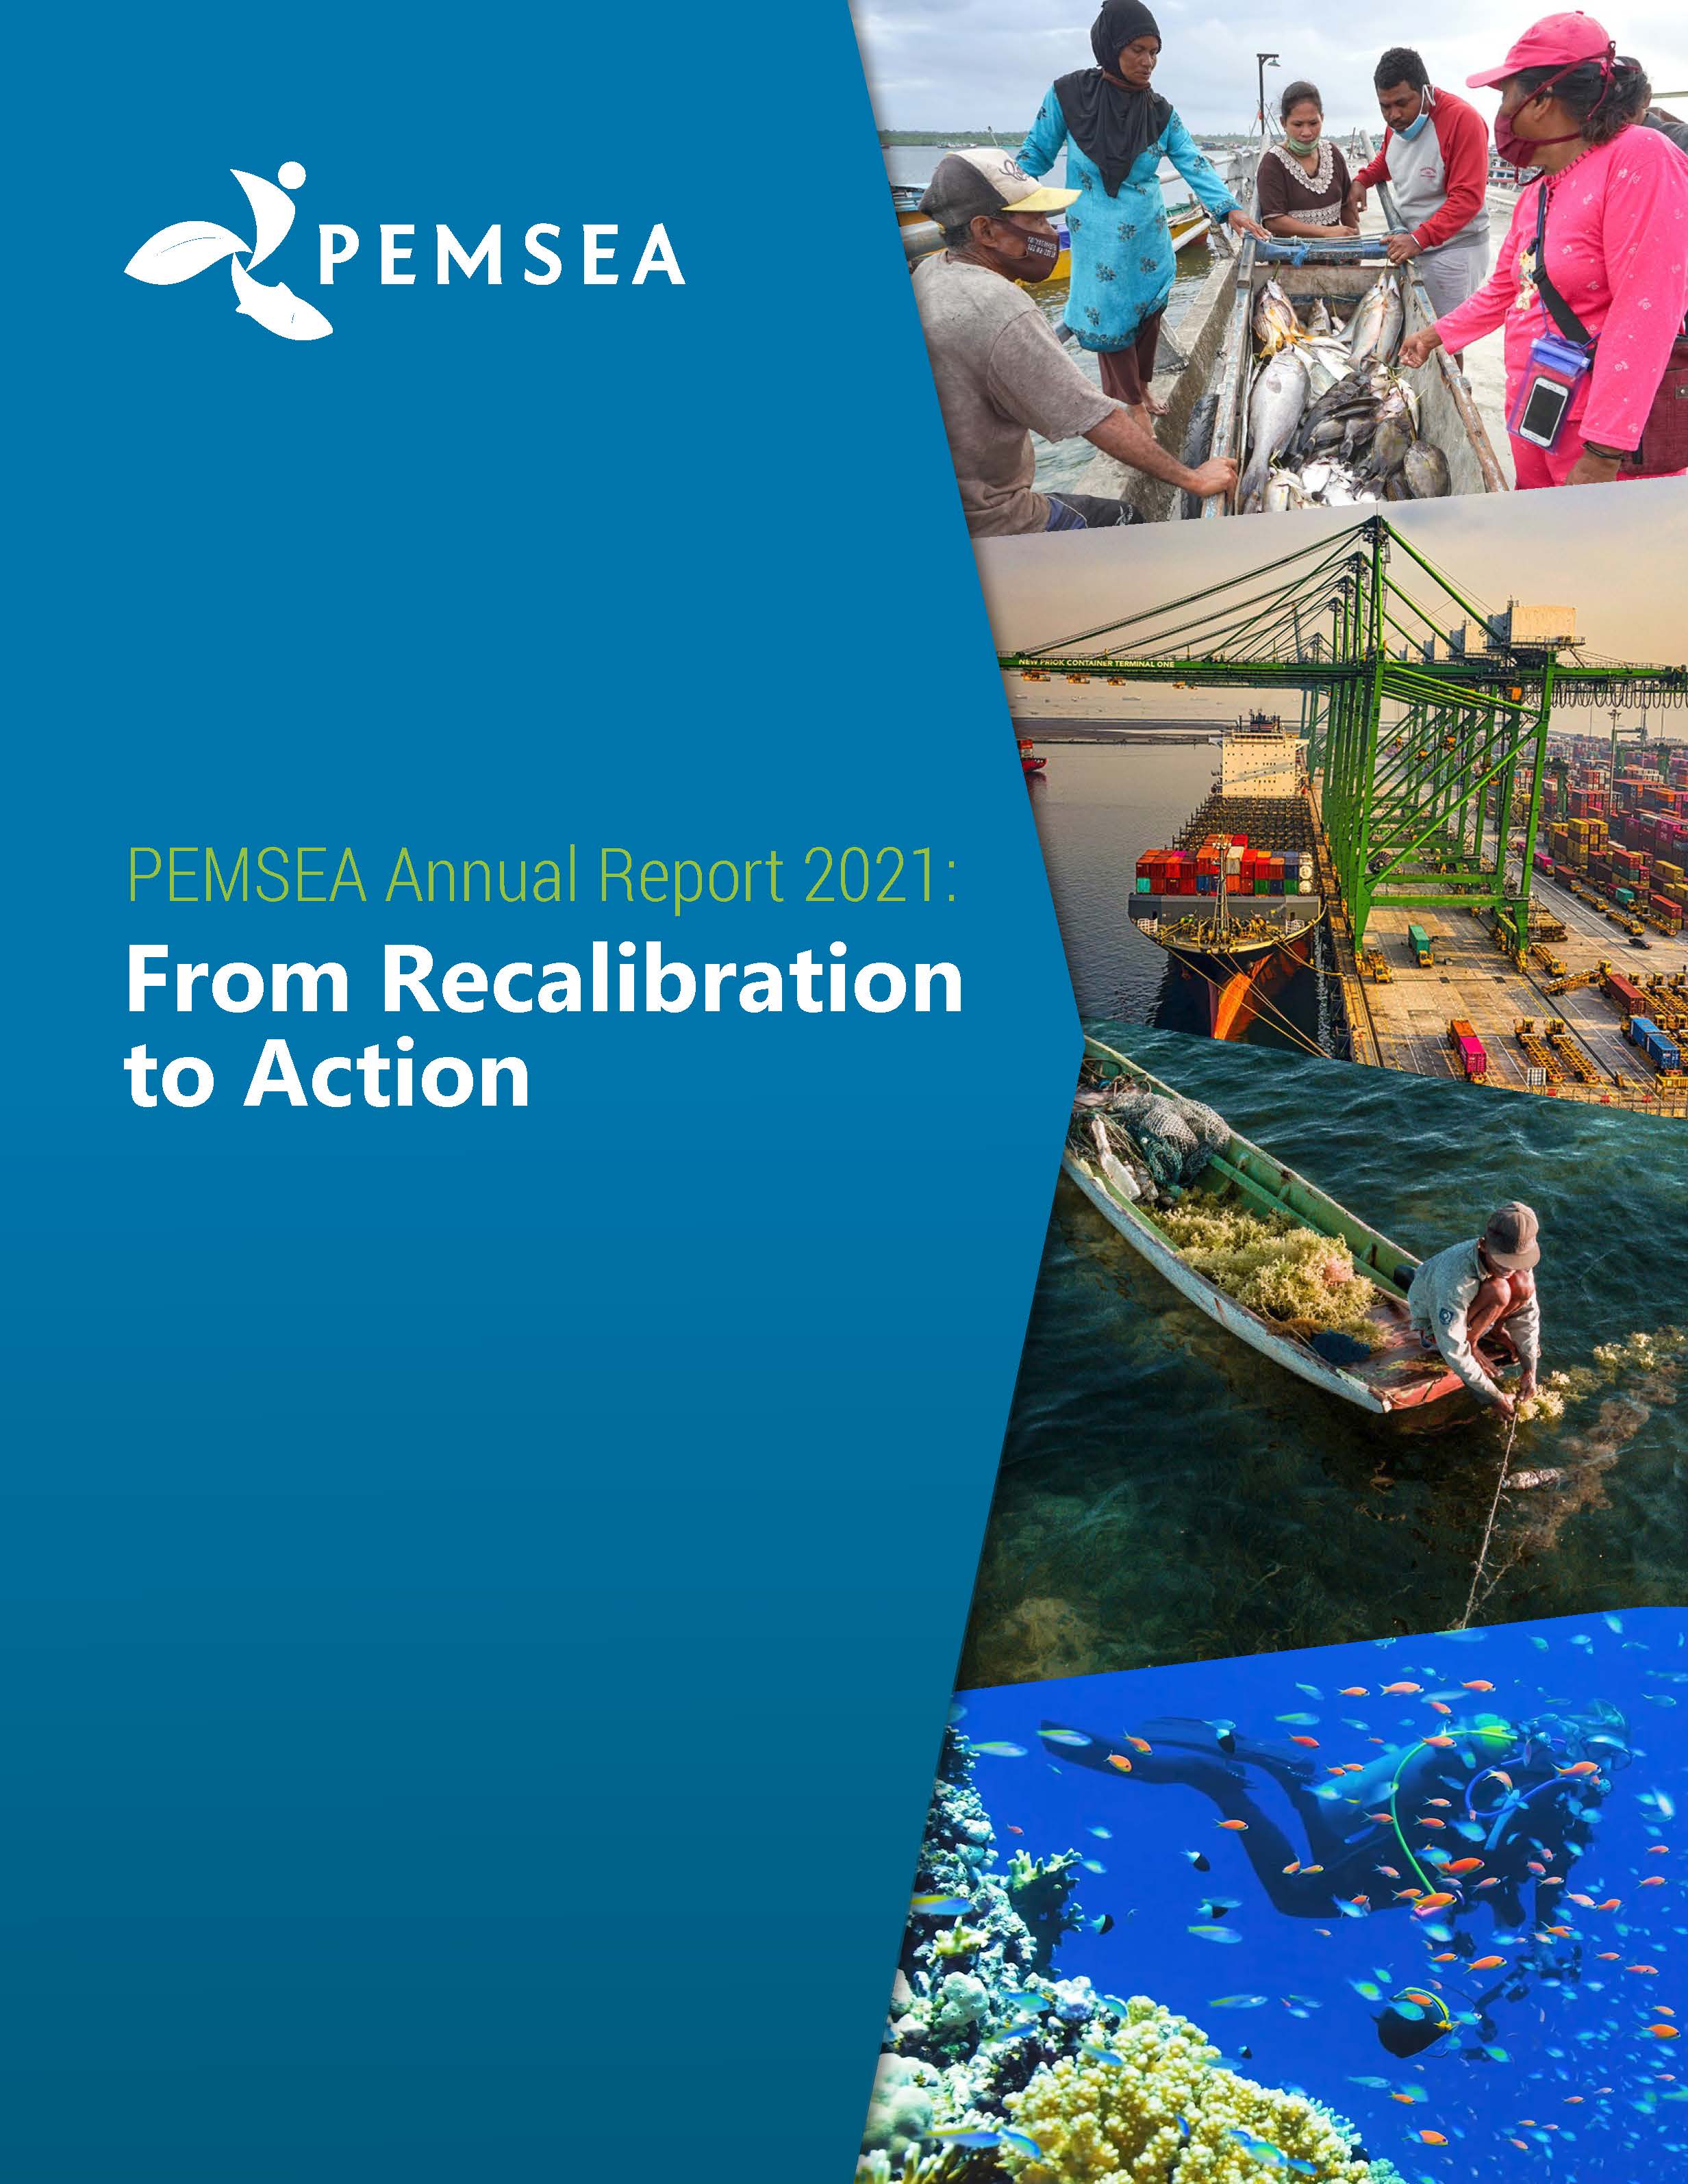 PEMSEA Annual Report 2021: From Recalibration to Action